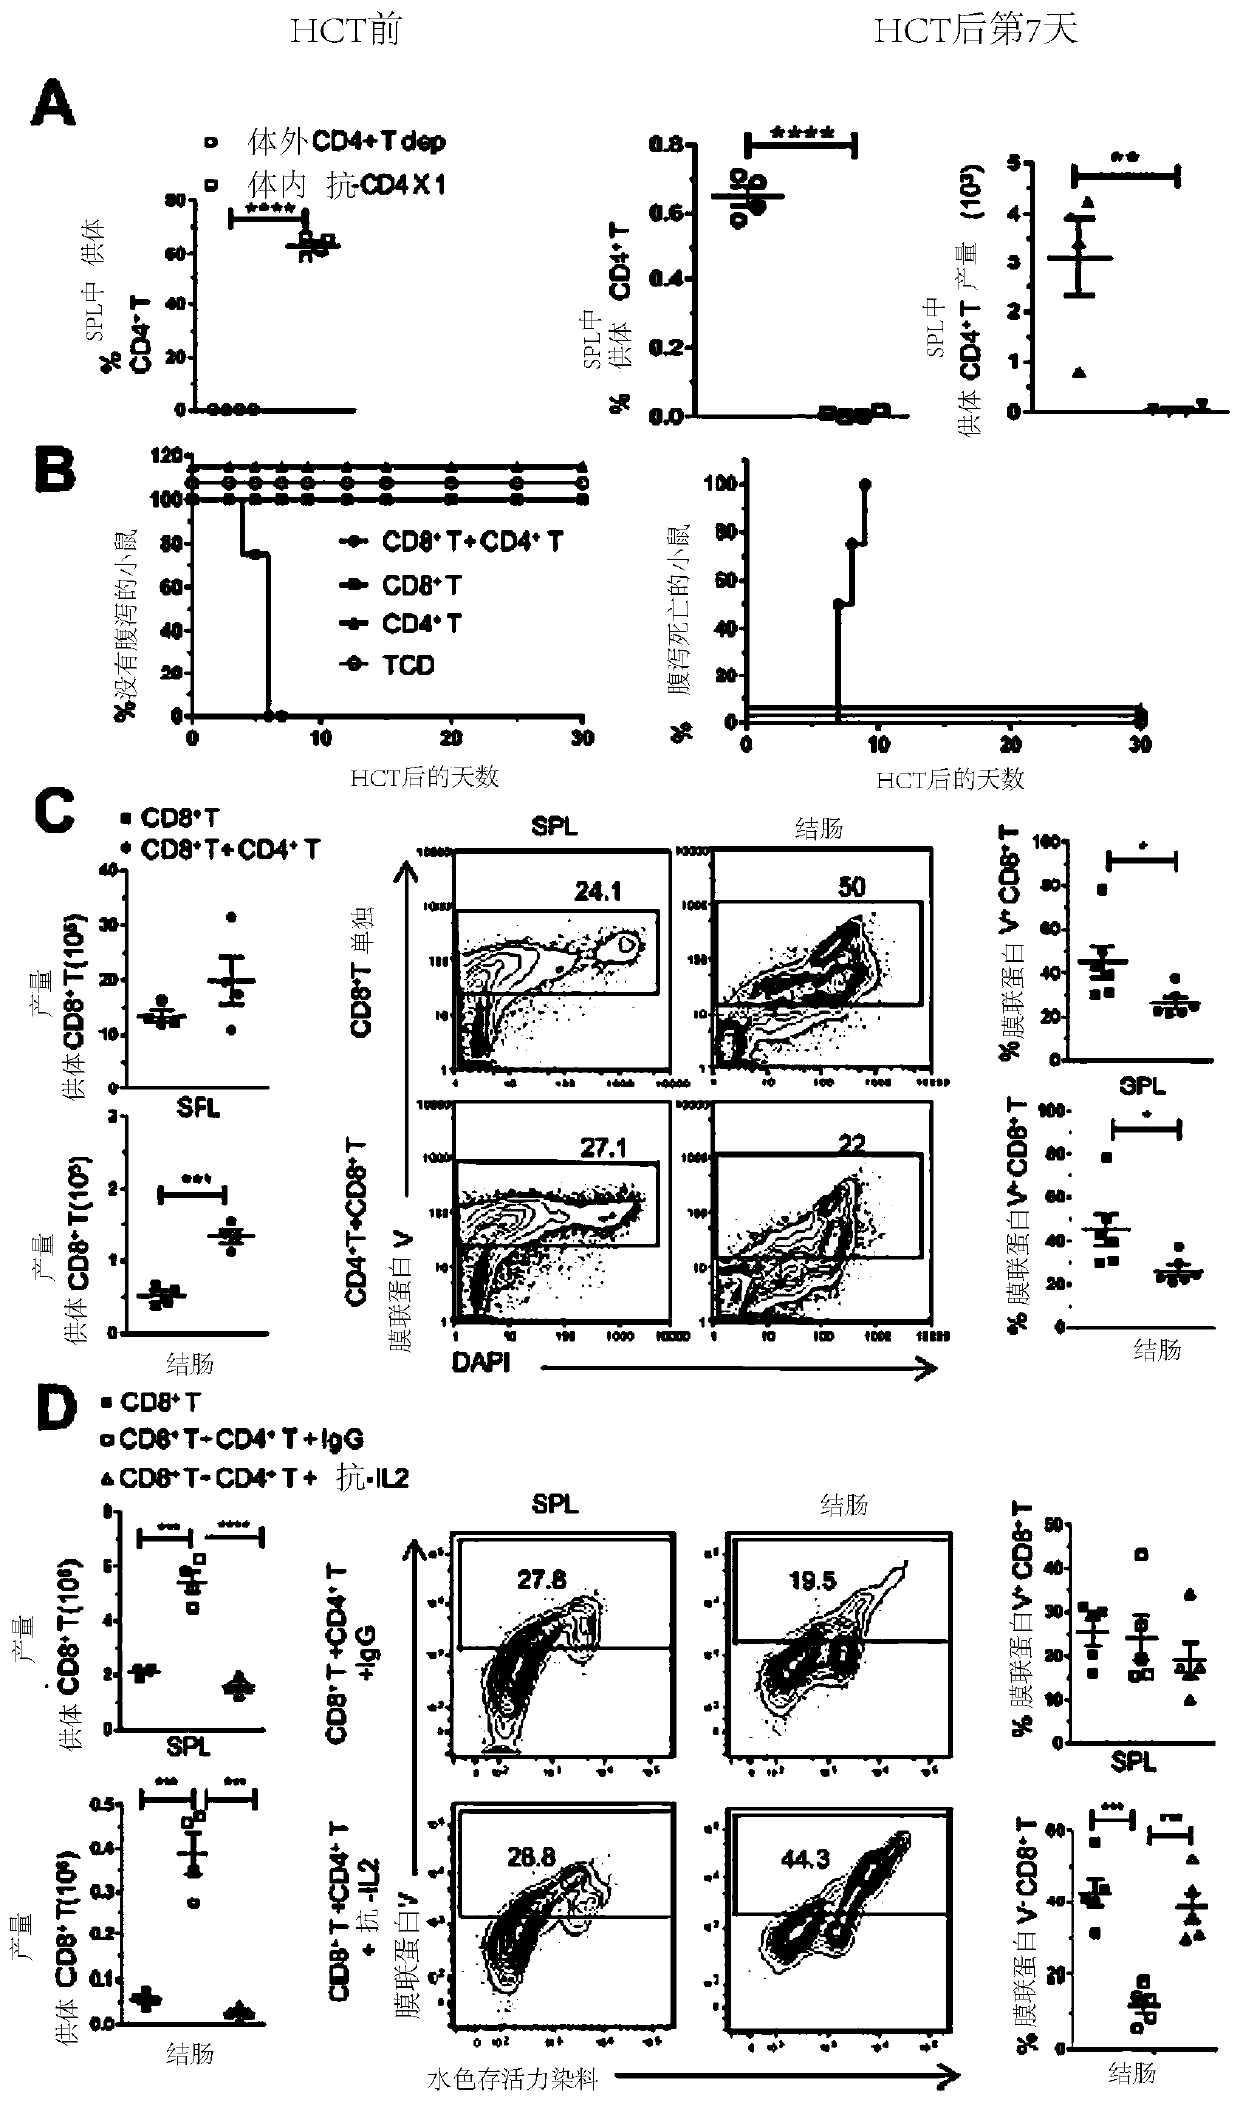 Methods for in vivo expansion of cd8+ t cells and prevention or treatment of gvhd